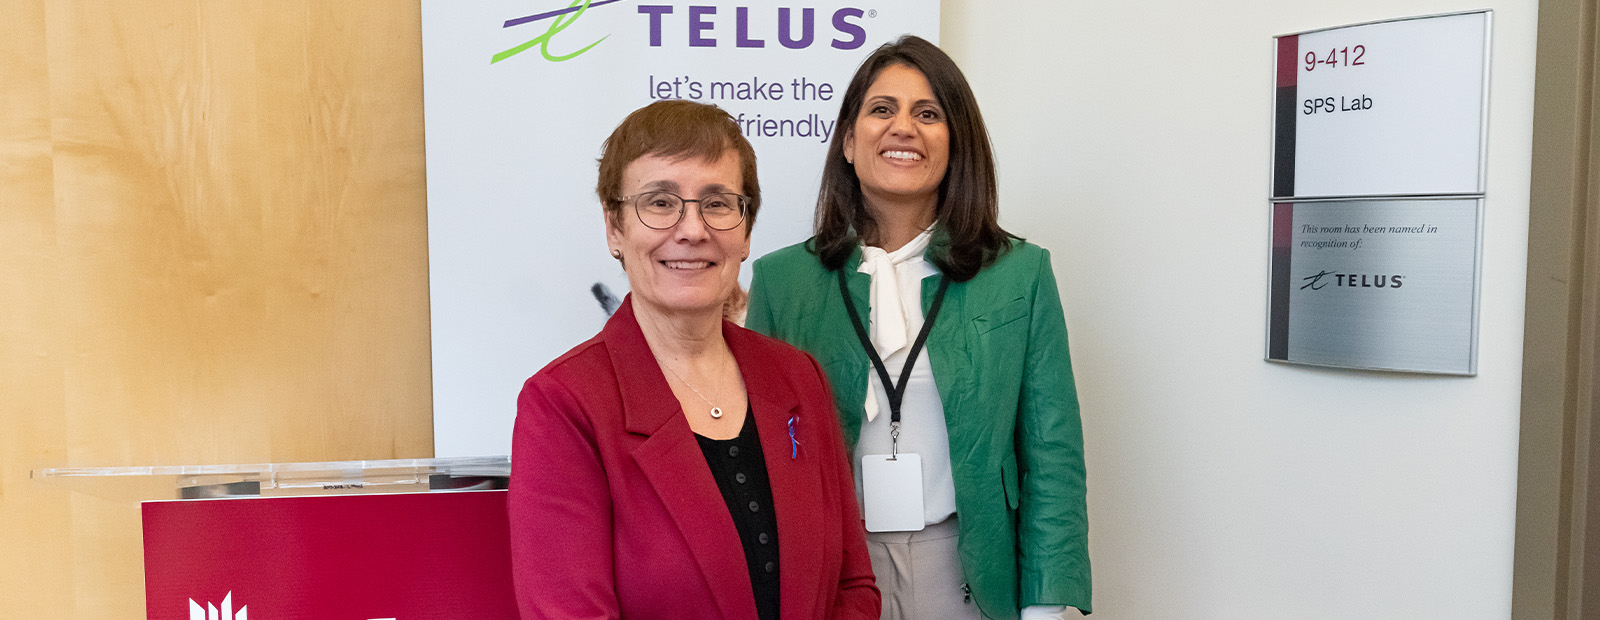 Dr. Annette Trimbee and Zainul Mawji stand outside of a closed classroom door. A plaque beside the door notes that the room is named for TELUS